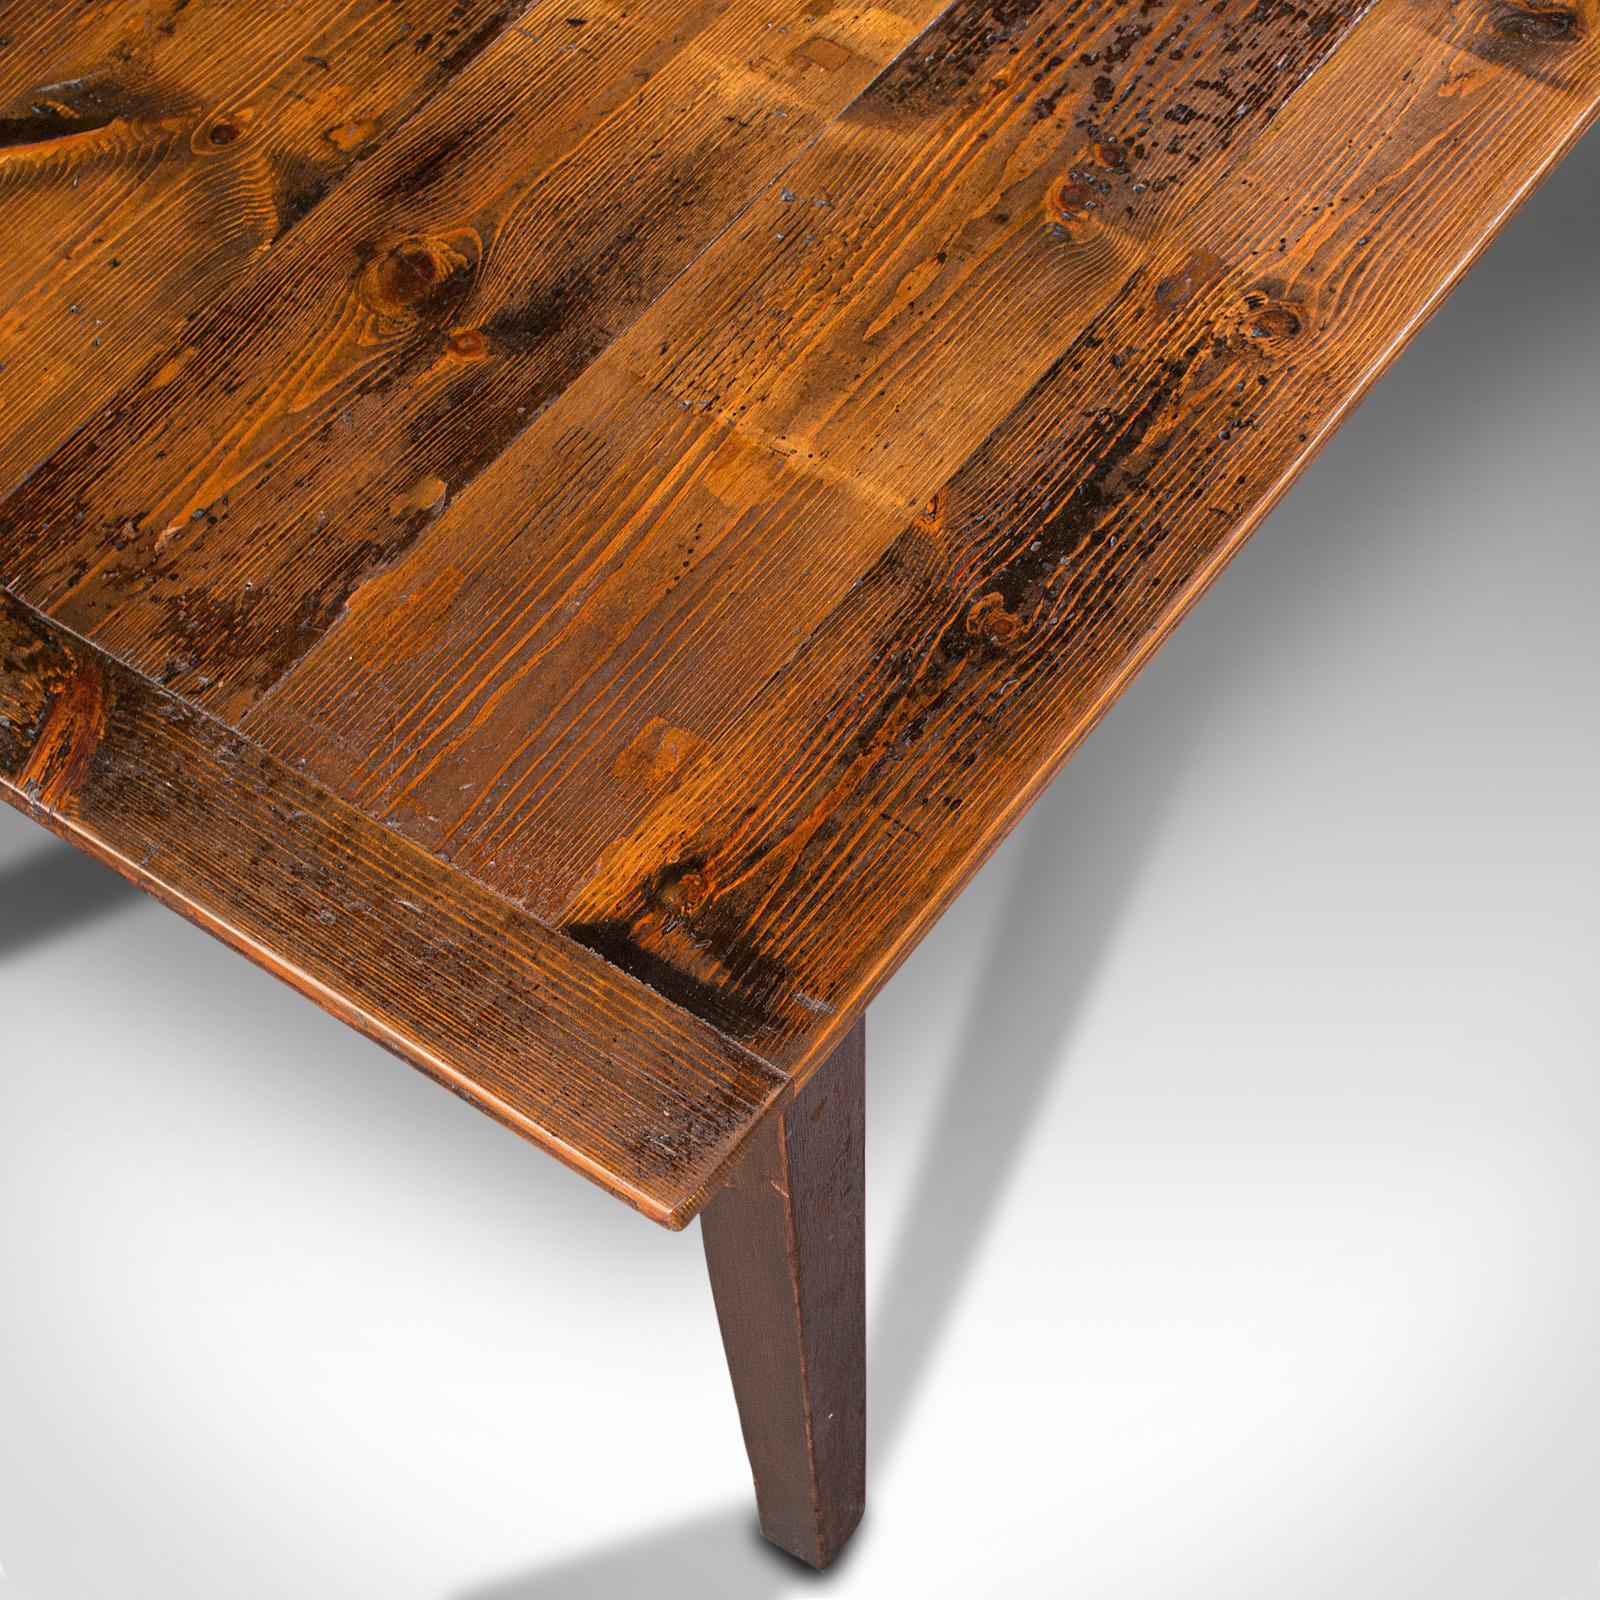 19th Century Antique Farmhouse Table, English, Pine, Country Kitchen, Dining, Victorian, 1900